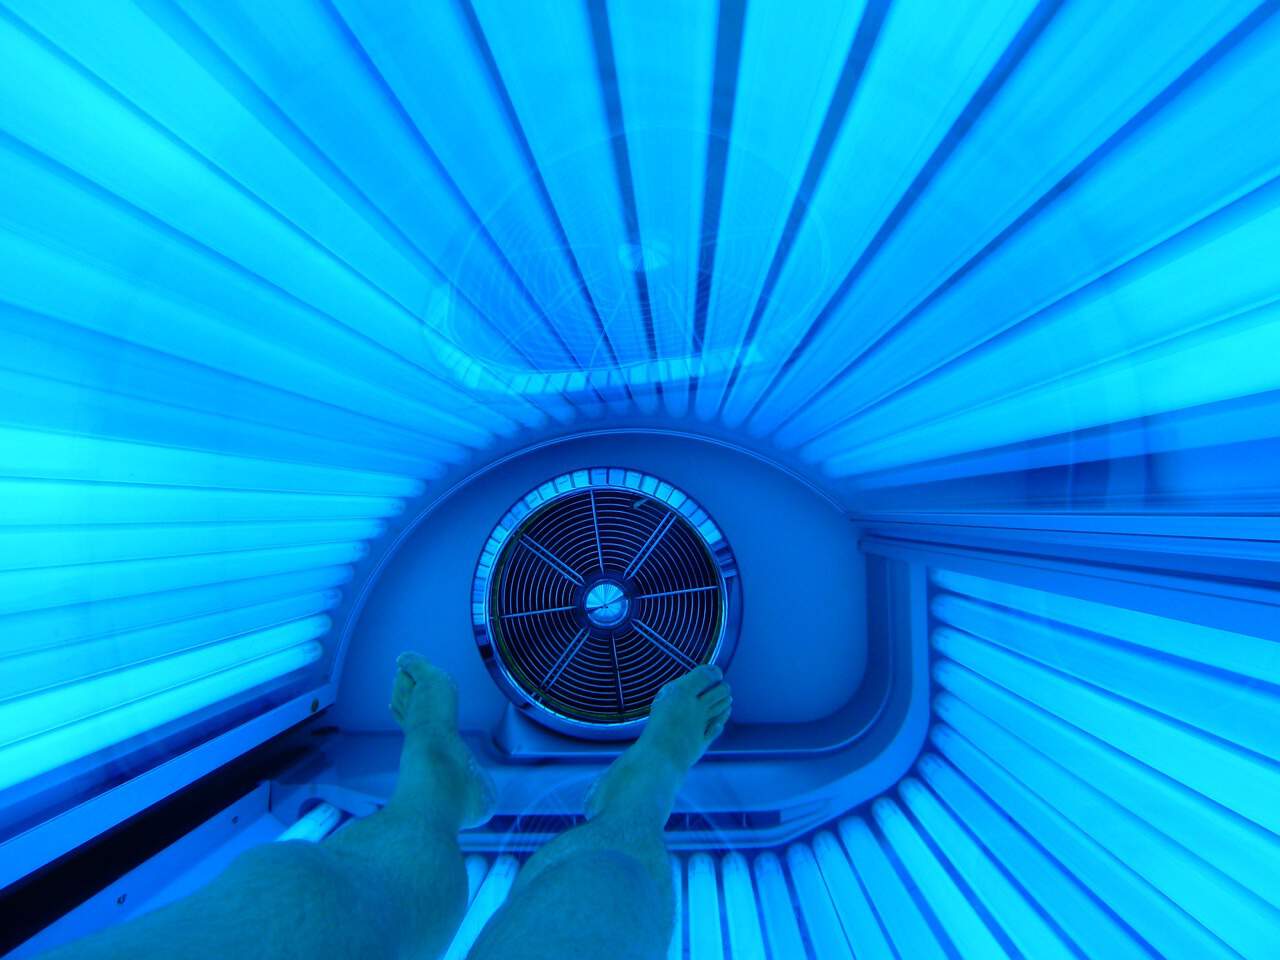 do tanning beds help joint pain